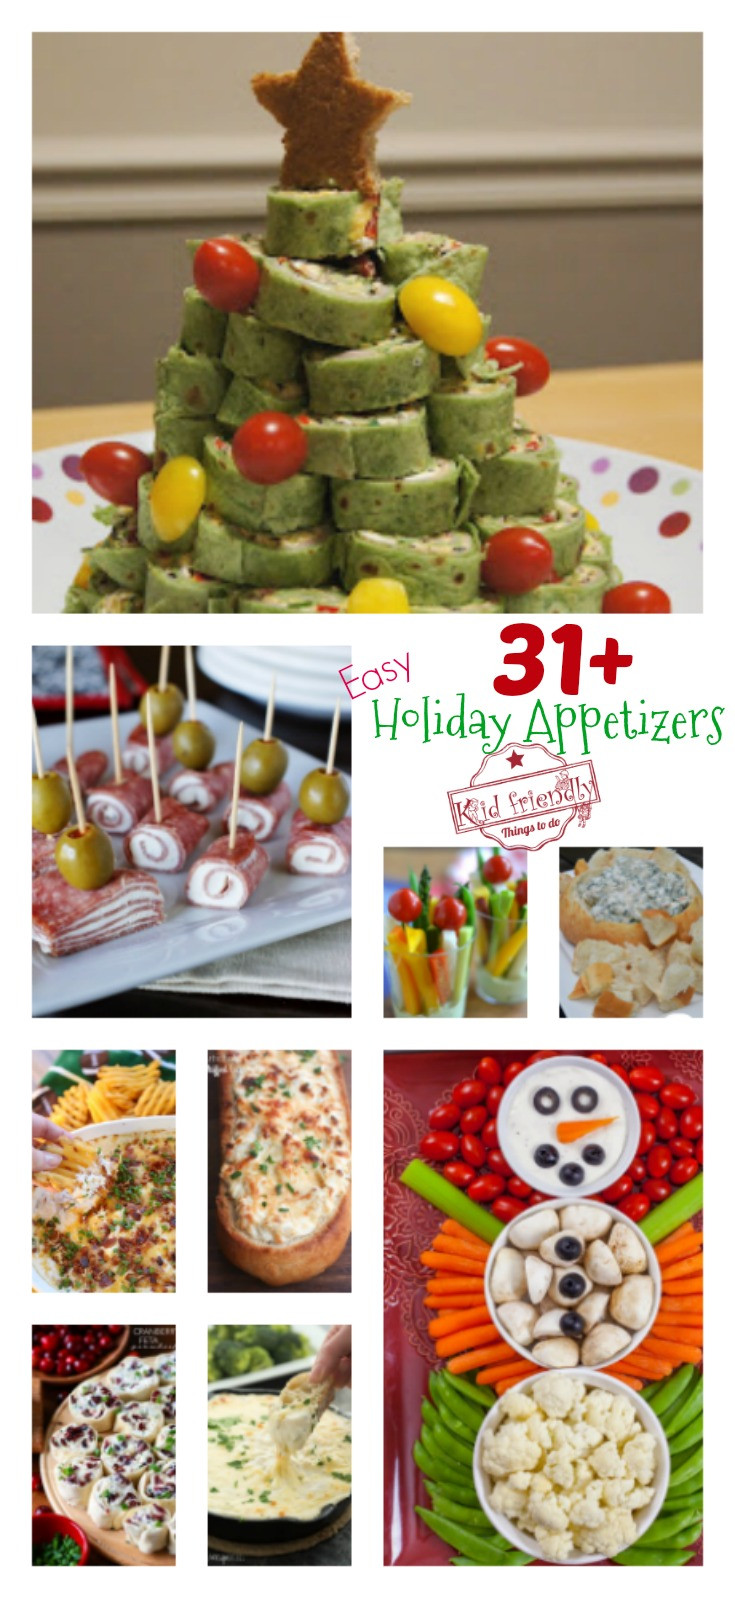 Appetizers For Christmas Party
 Over 31 Easy Holiday Appetizers to Make for Christmas New